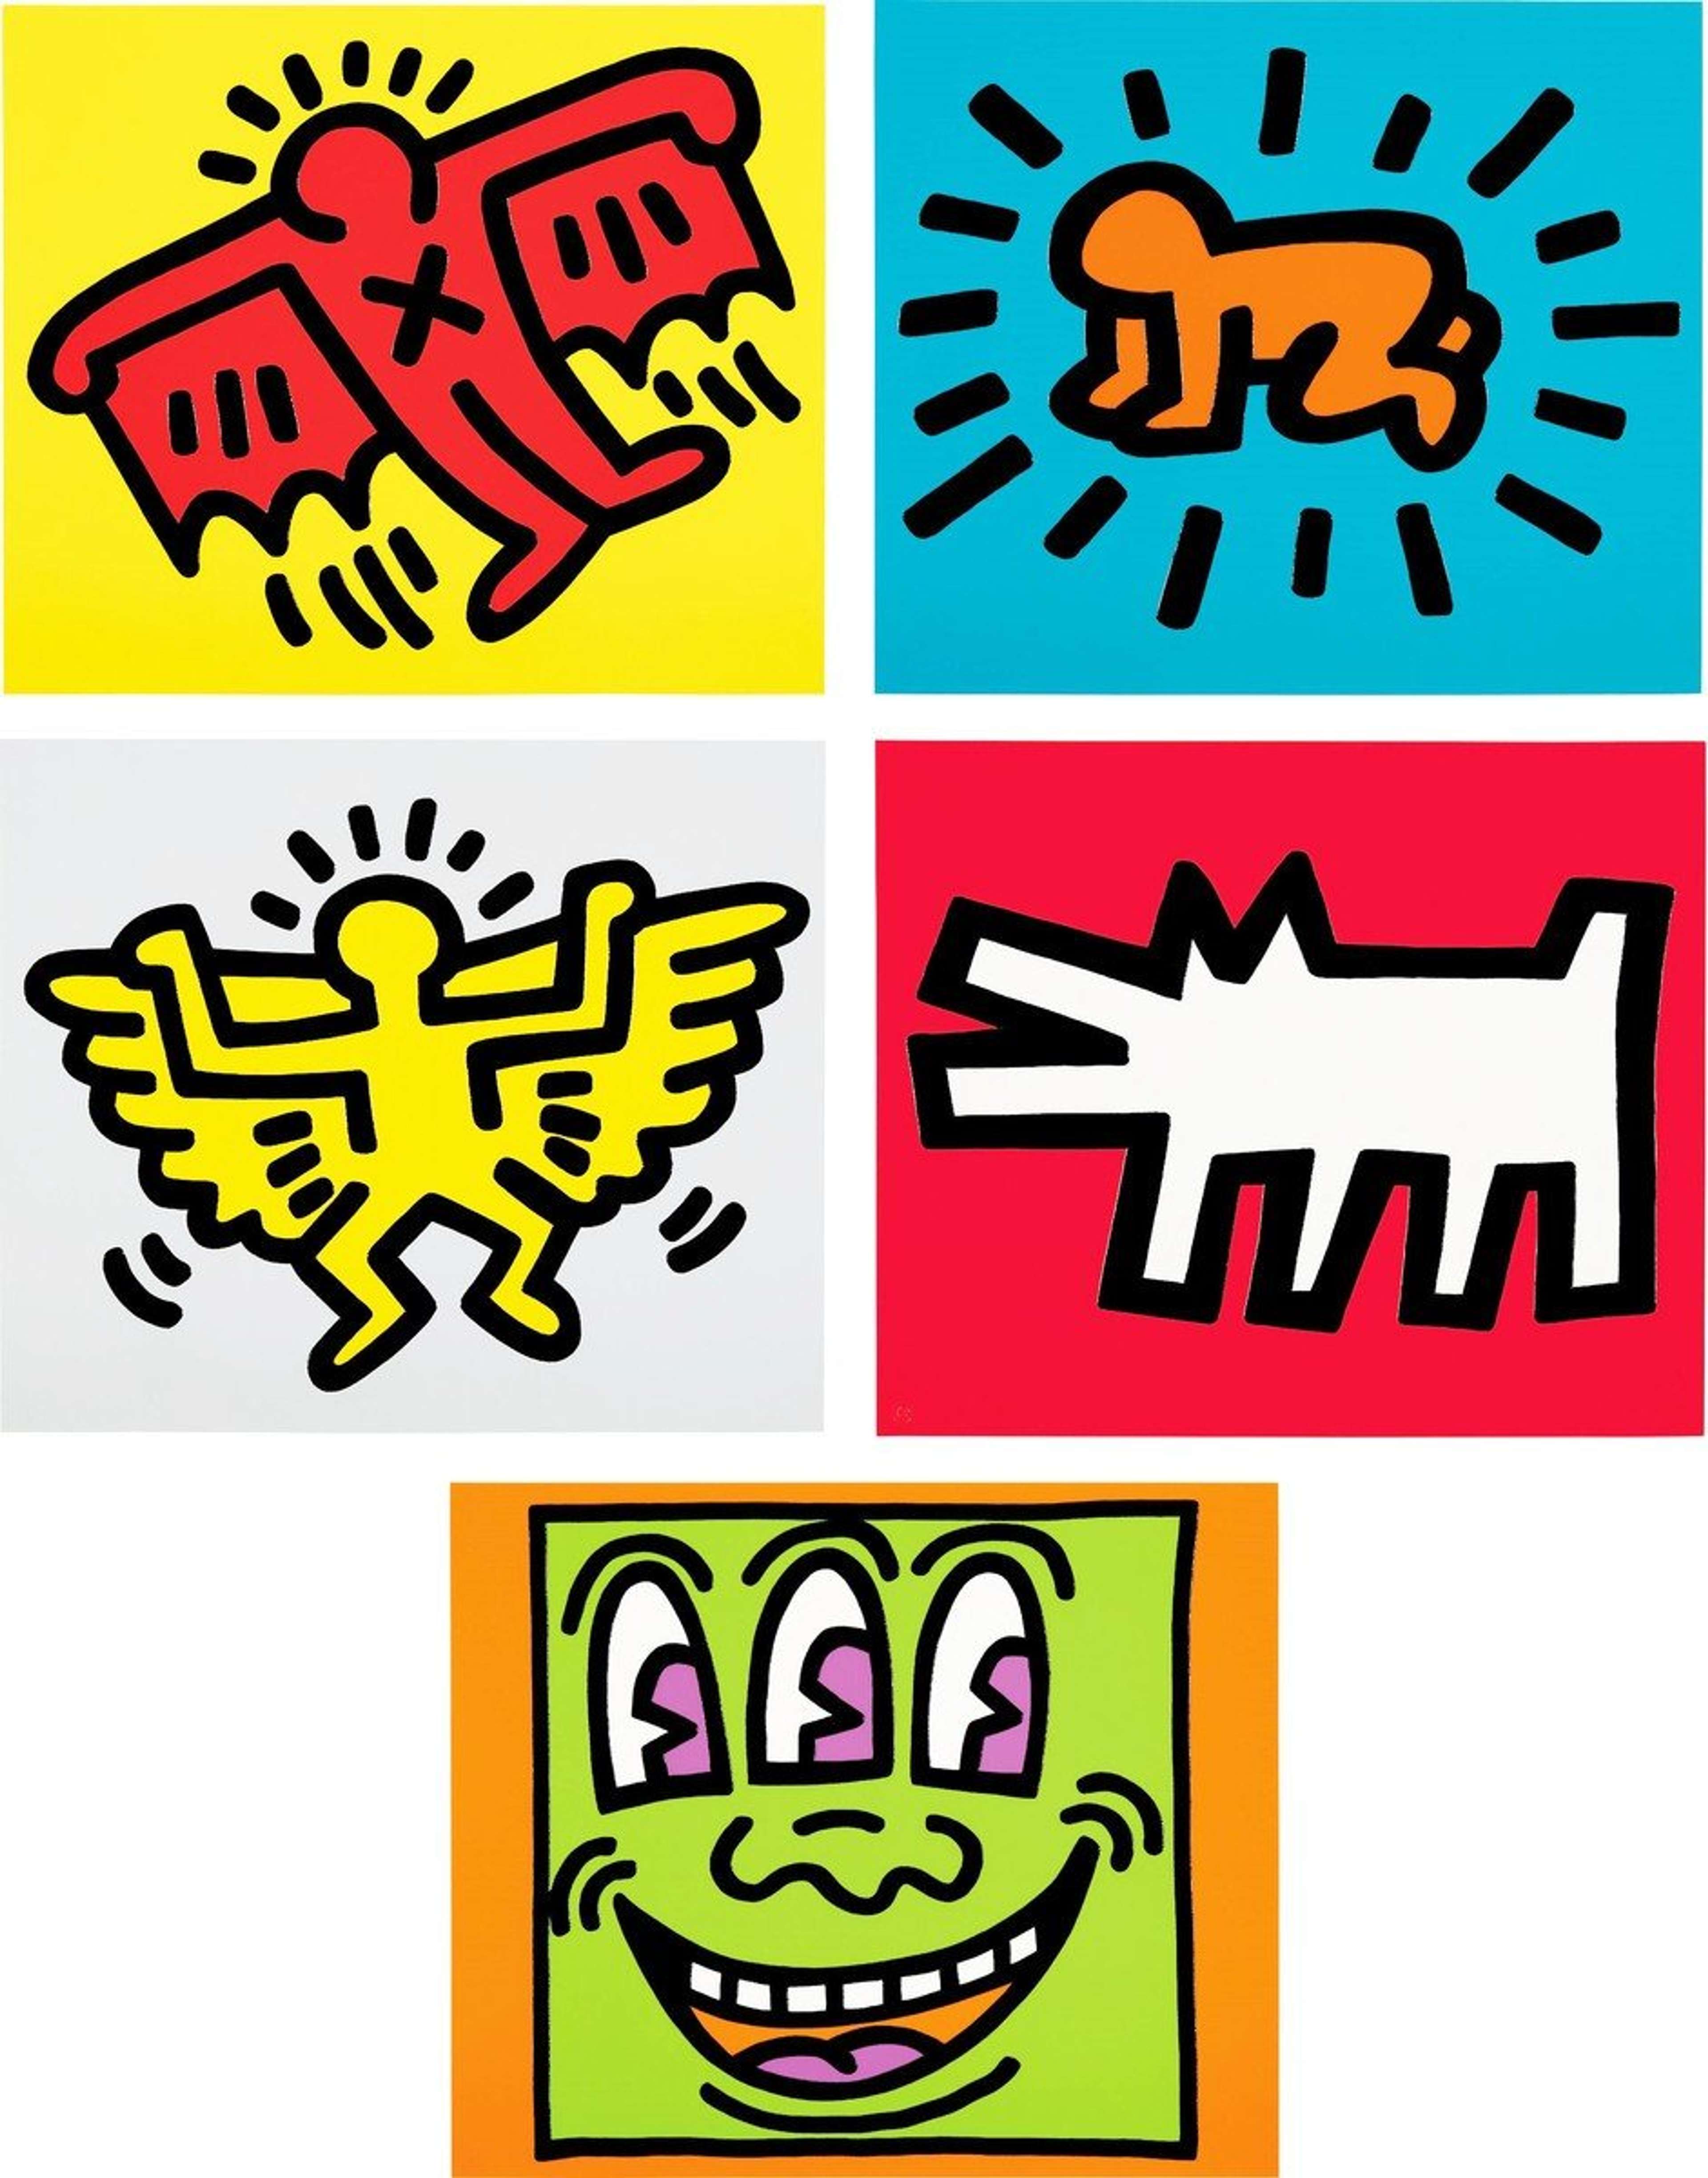 10 Facts About Keith Haring's Icons